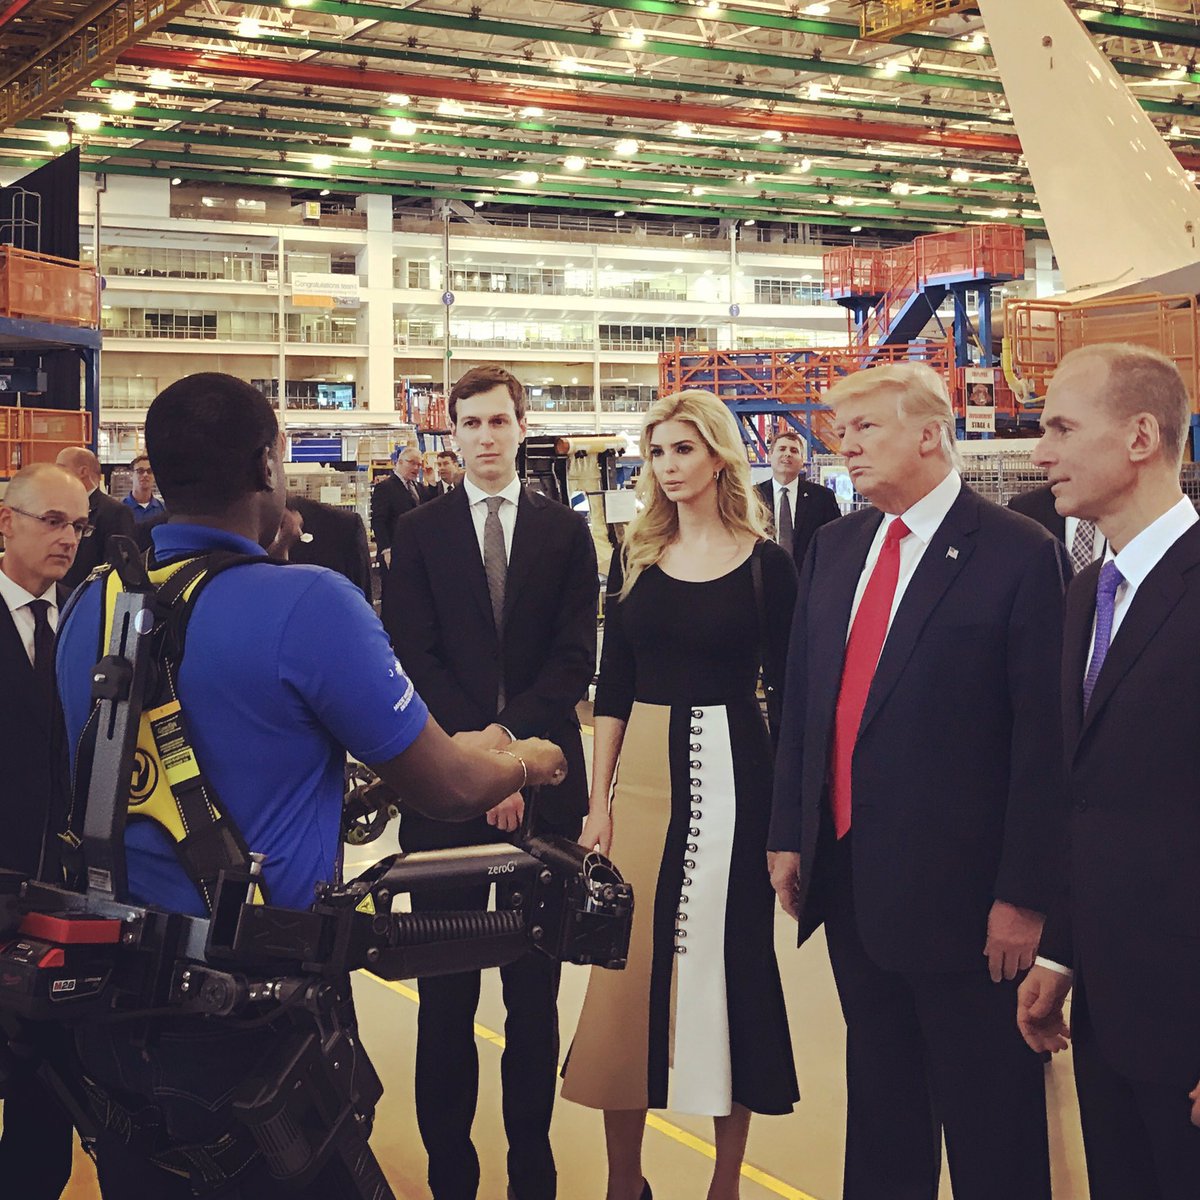 Visiting @boeing in South Carolina with @realdonaldtrump today https://t.co/HrWvsjpiPE